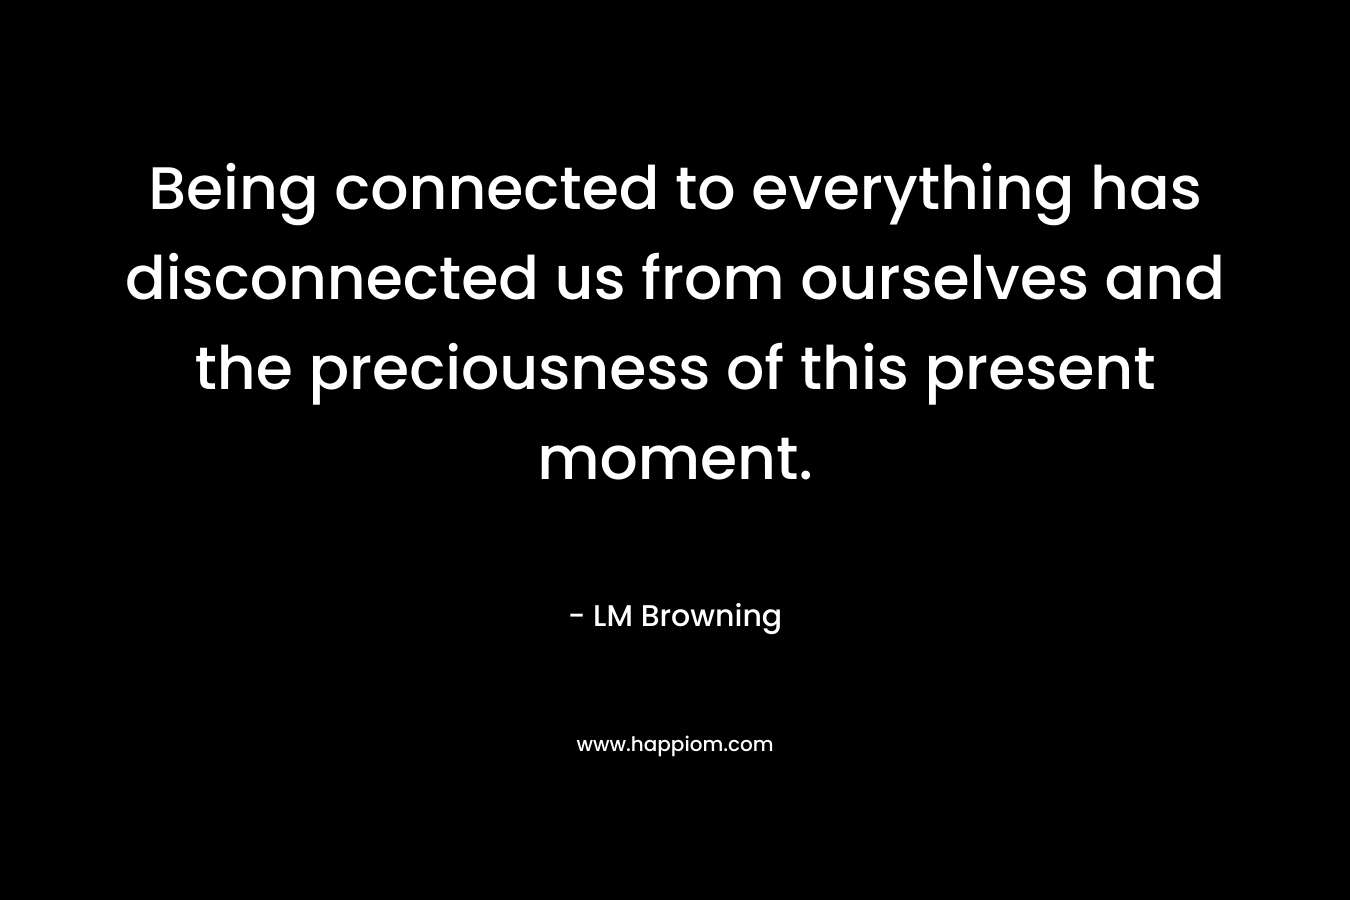 Being connected to everything has disconnected us from ourselves and the preciousness of this present moment. – LM Browning